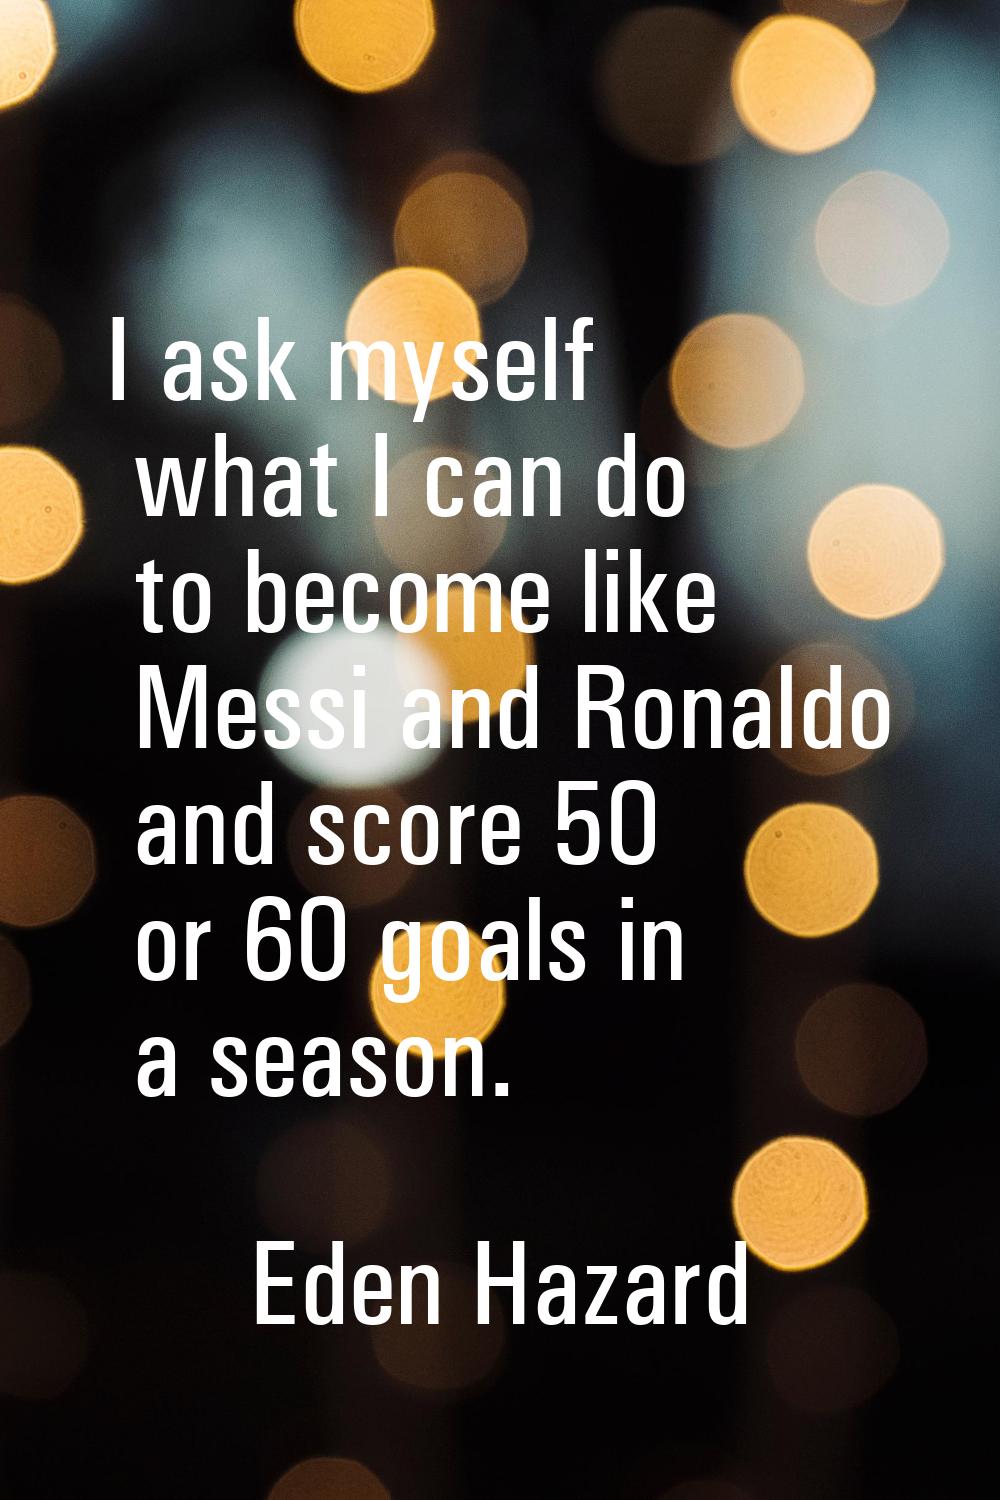 I ask myself what I can do to become like Messi and Ronaldo and score 50 or 60 goals in a season.